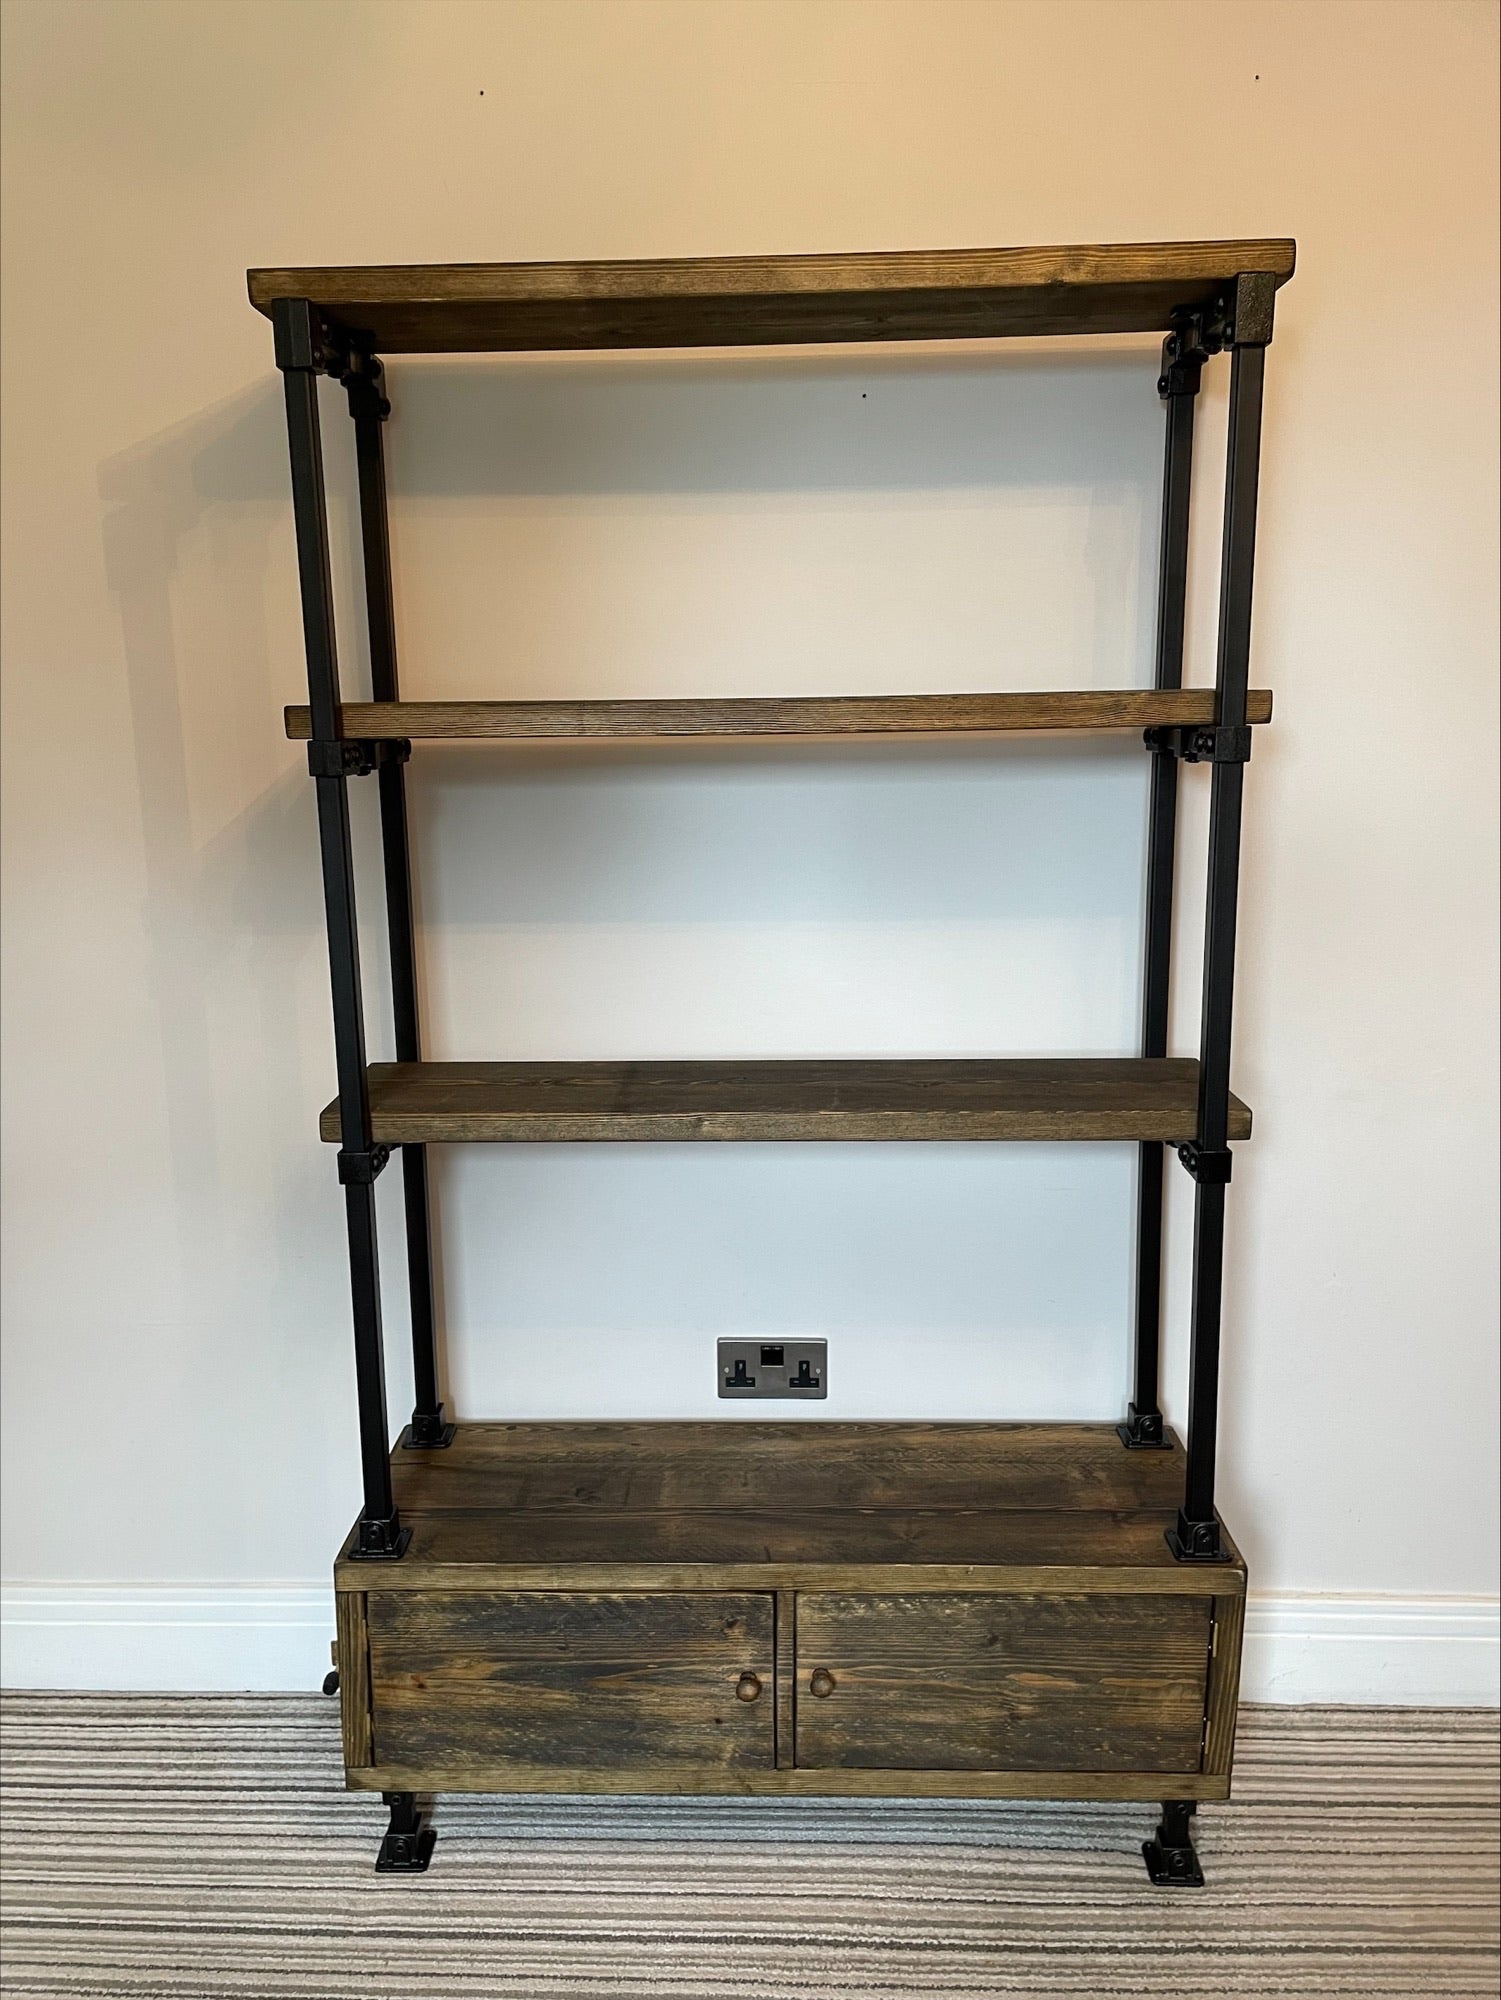 Industrial/Rustic Ladder Style Shelving Unit with Cupboard and black framework.